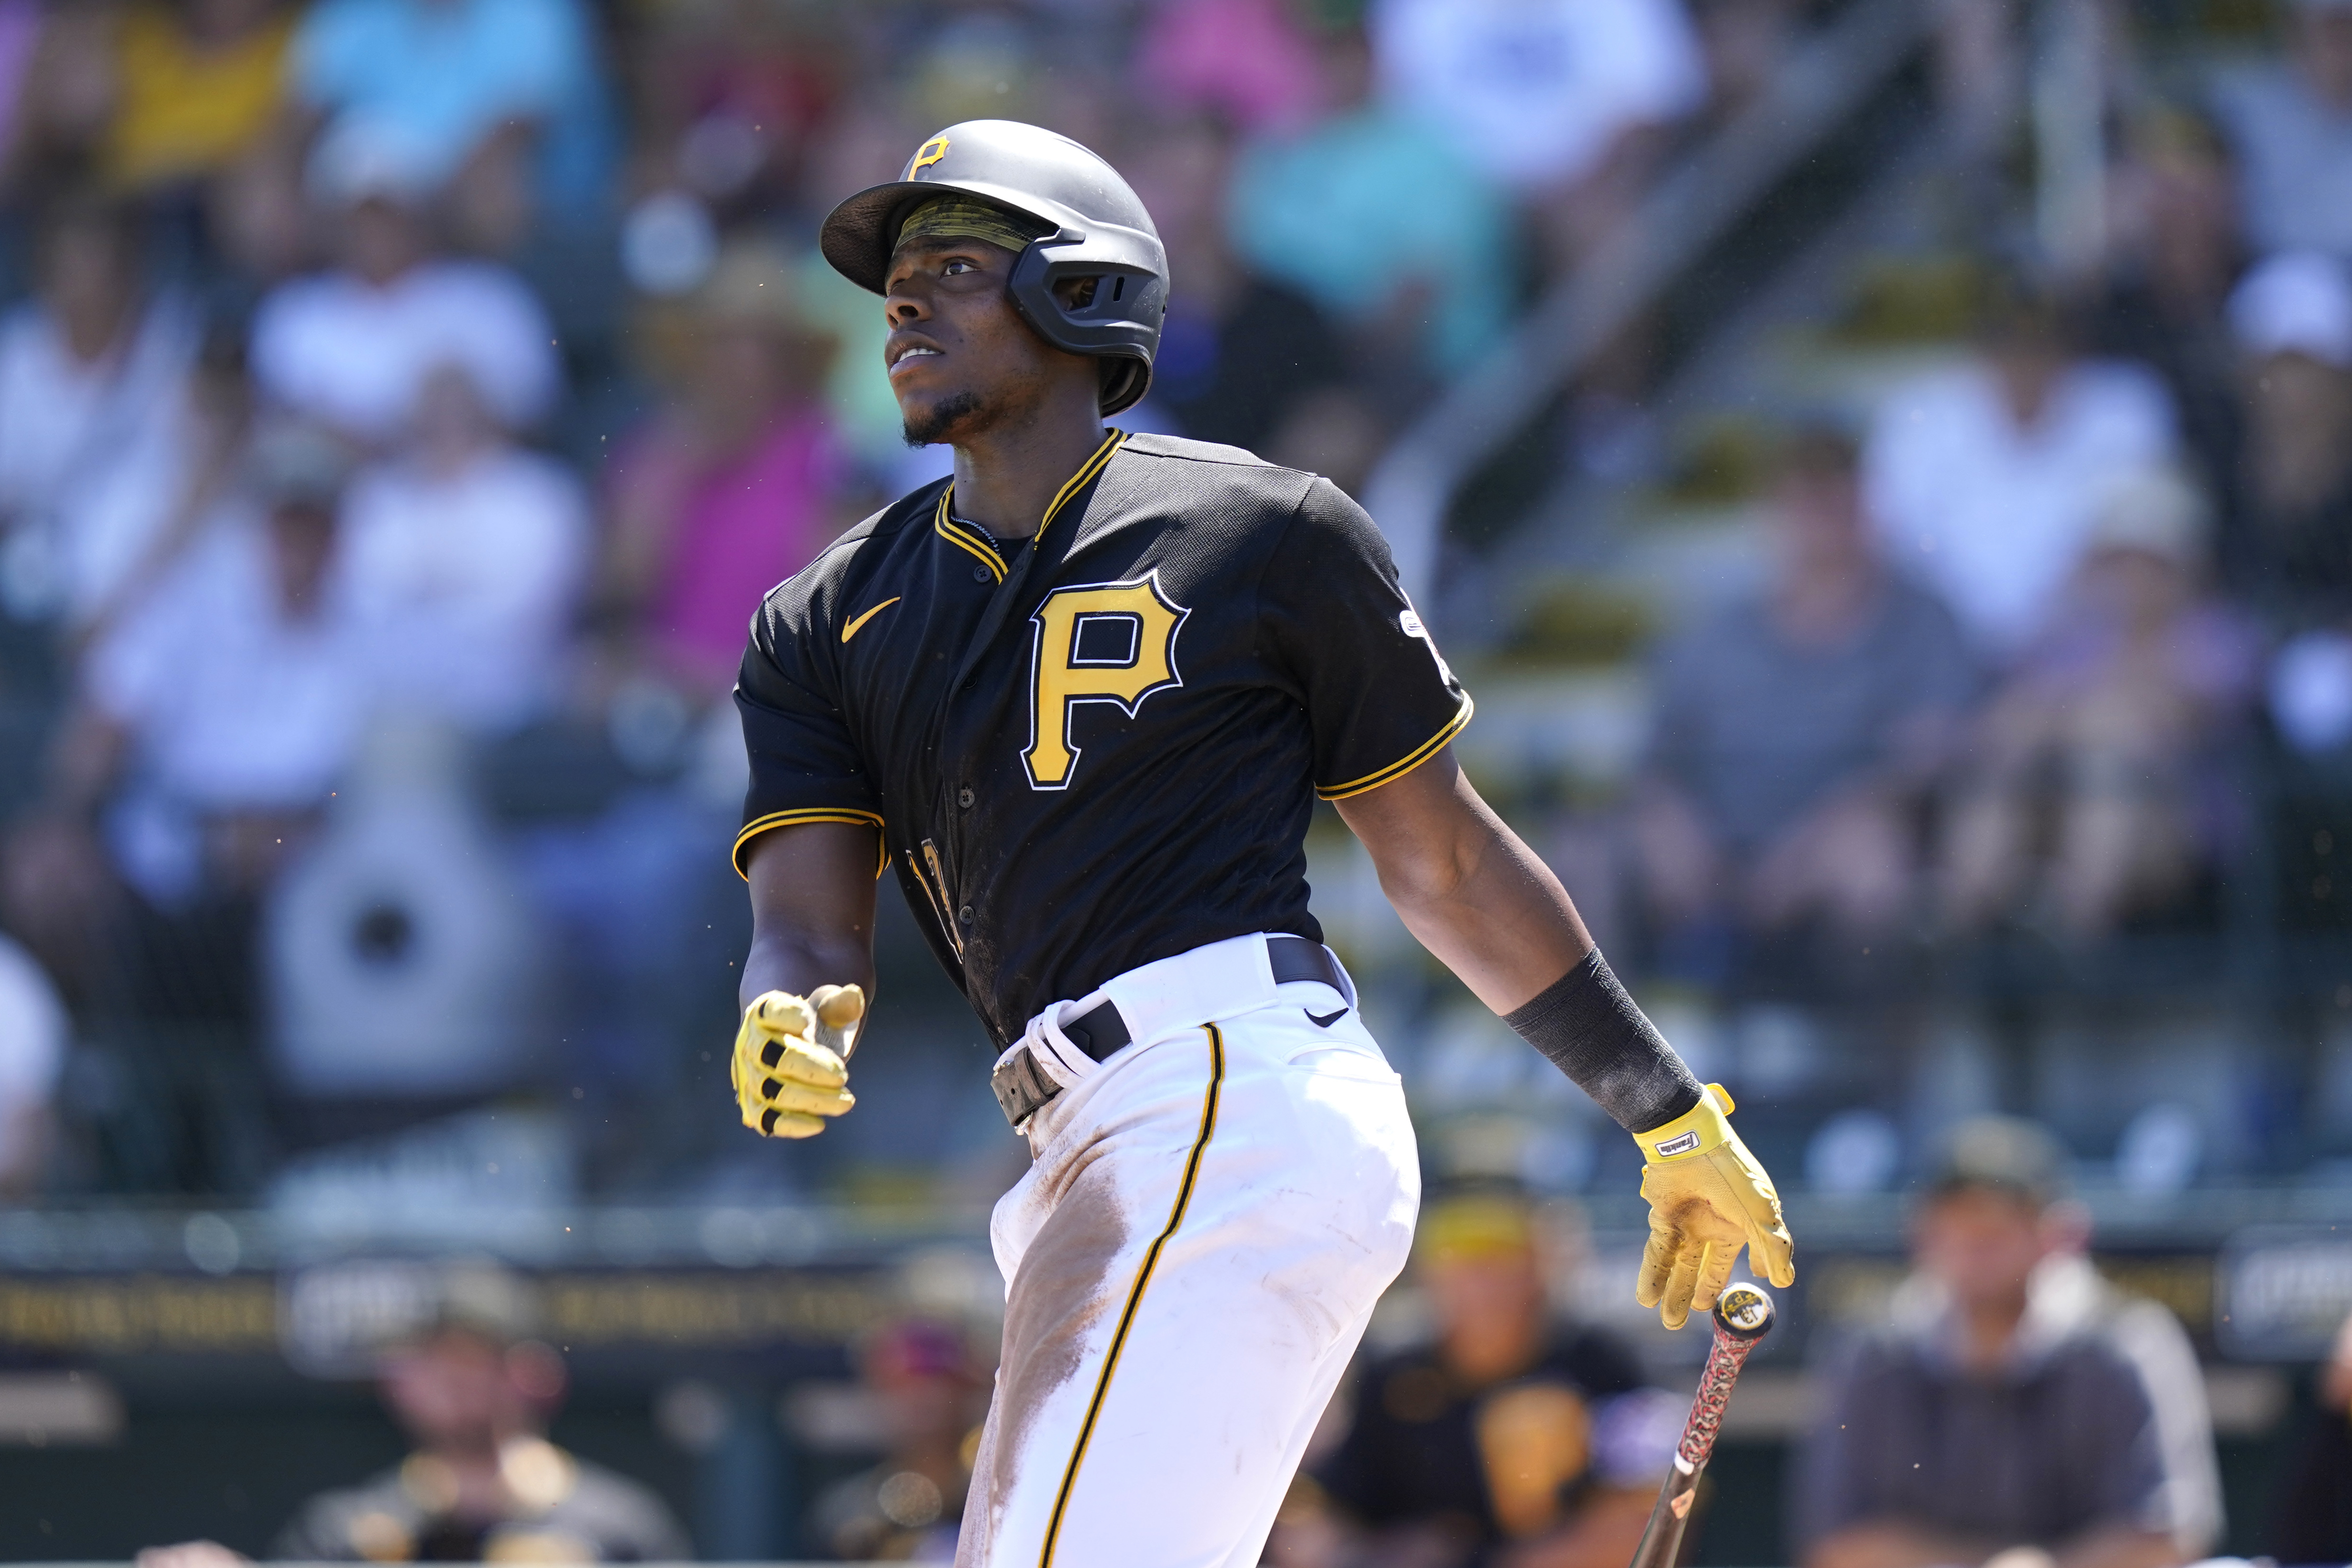 Ke'Bryan Hayes, Pirates Reportedly Agree to 8-Year, $70M Contract Extension